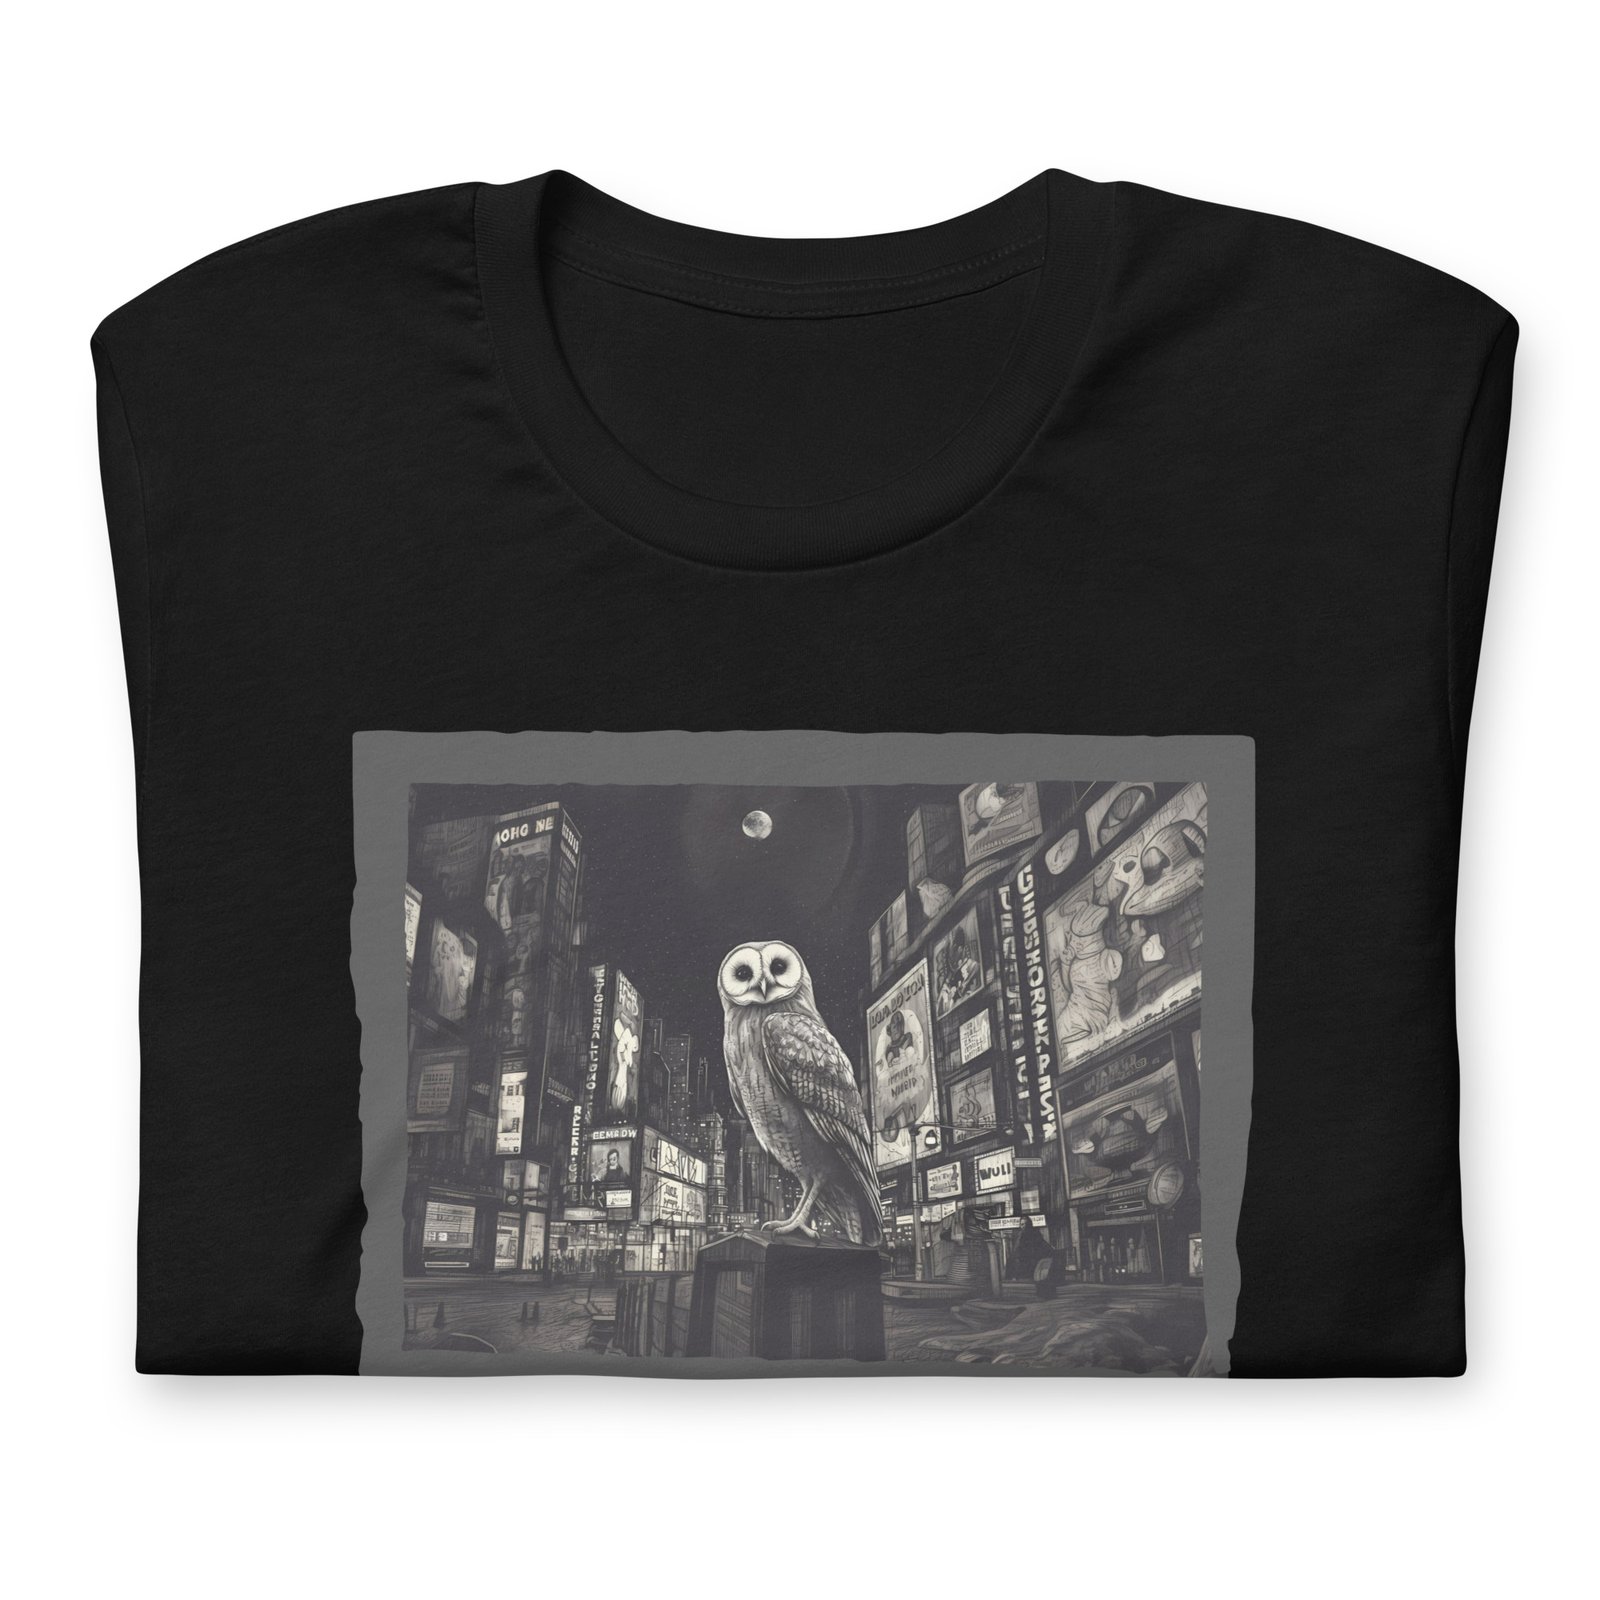 Apocalyptic Owl in Times Square T-Shirt